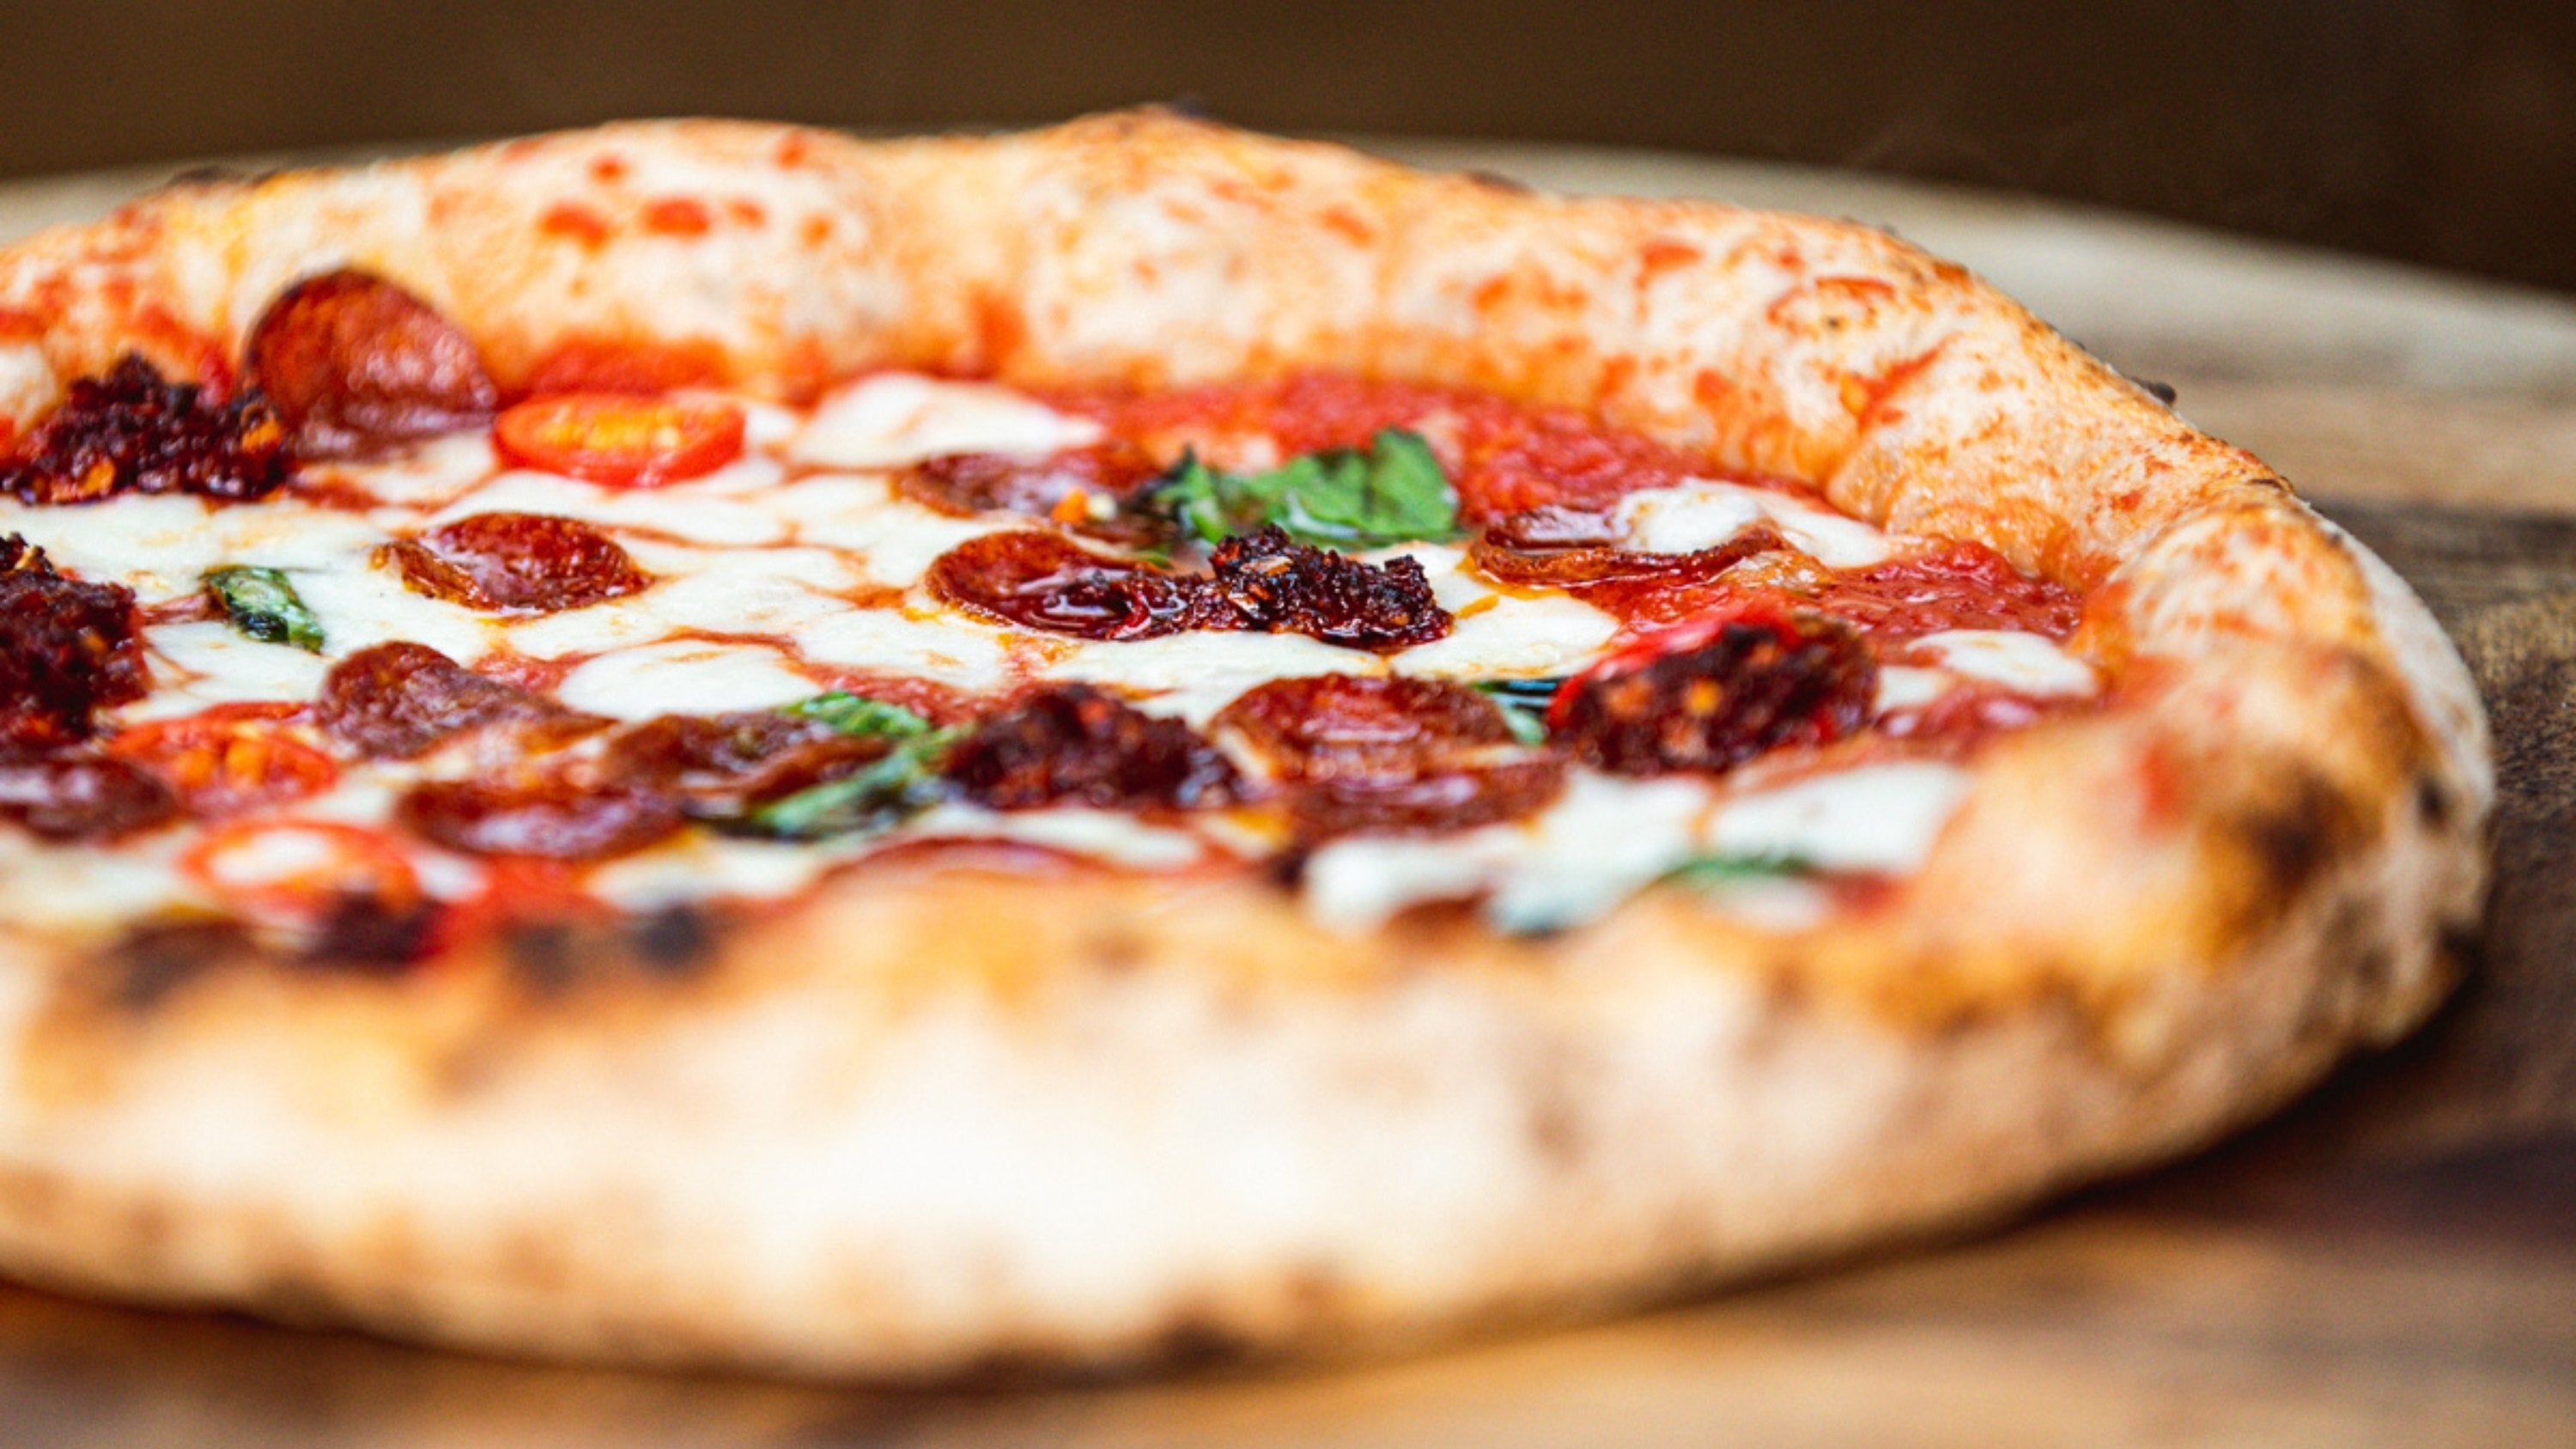 There’s nothing like the taste of fresh wood-fired pizza